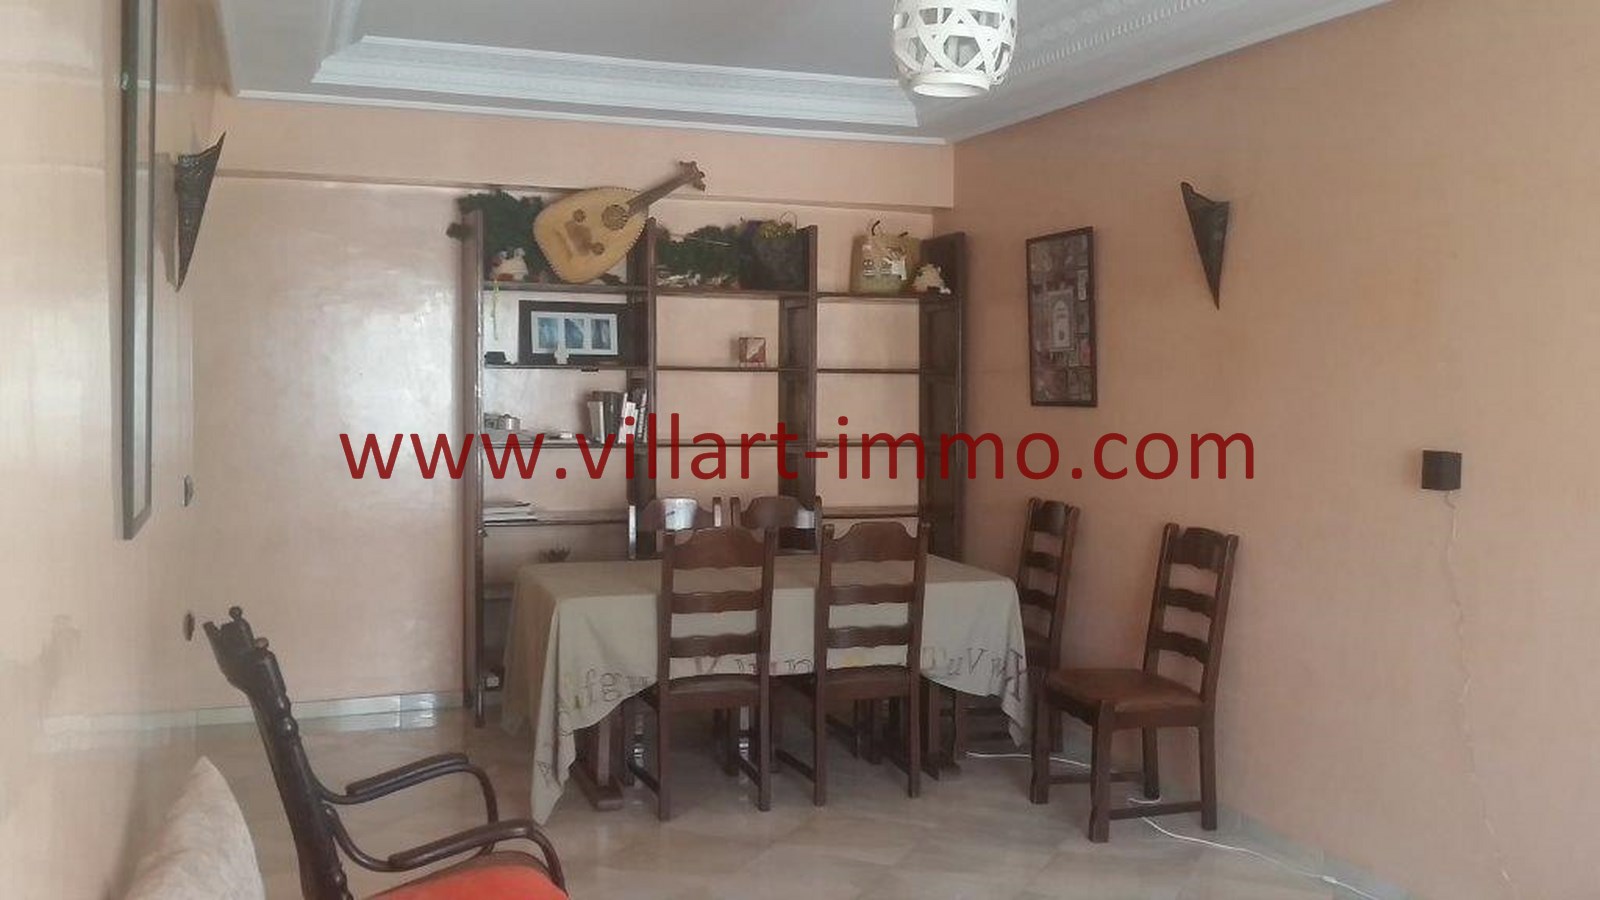 3-location-appartement-meuble-tanger-salle-a-manger-l856-villart-immo-agence-immobiliere